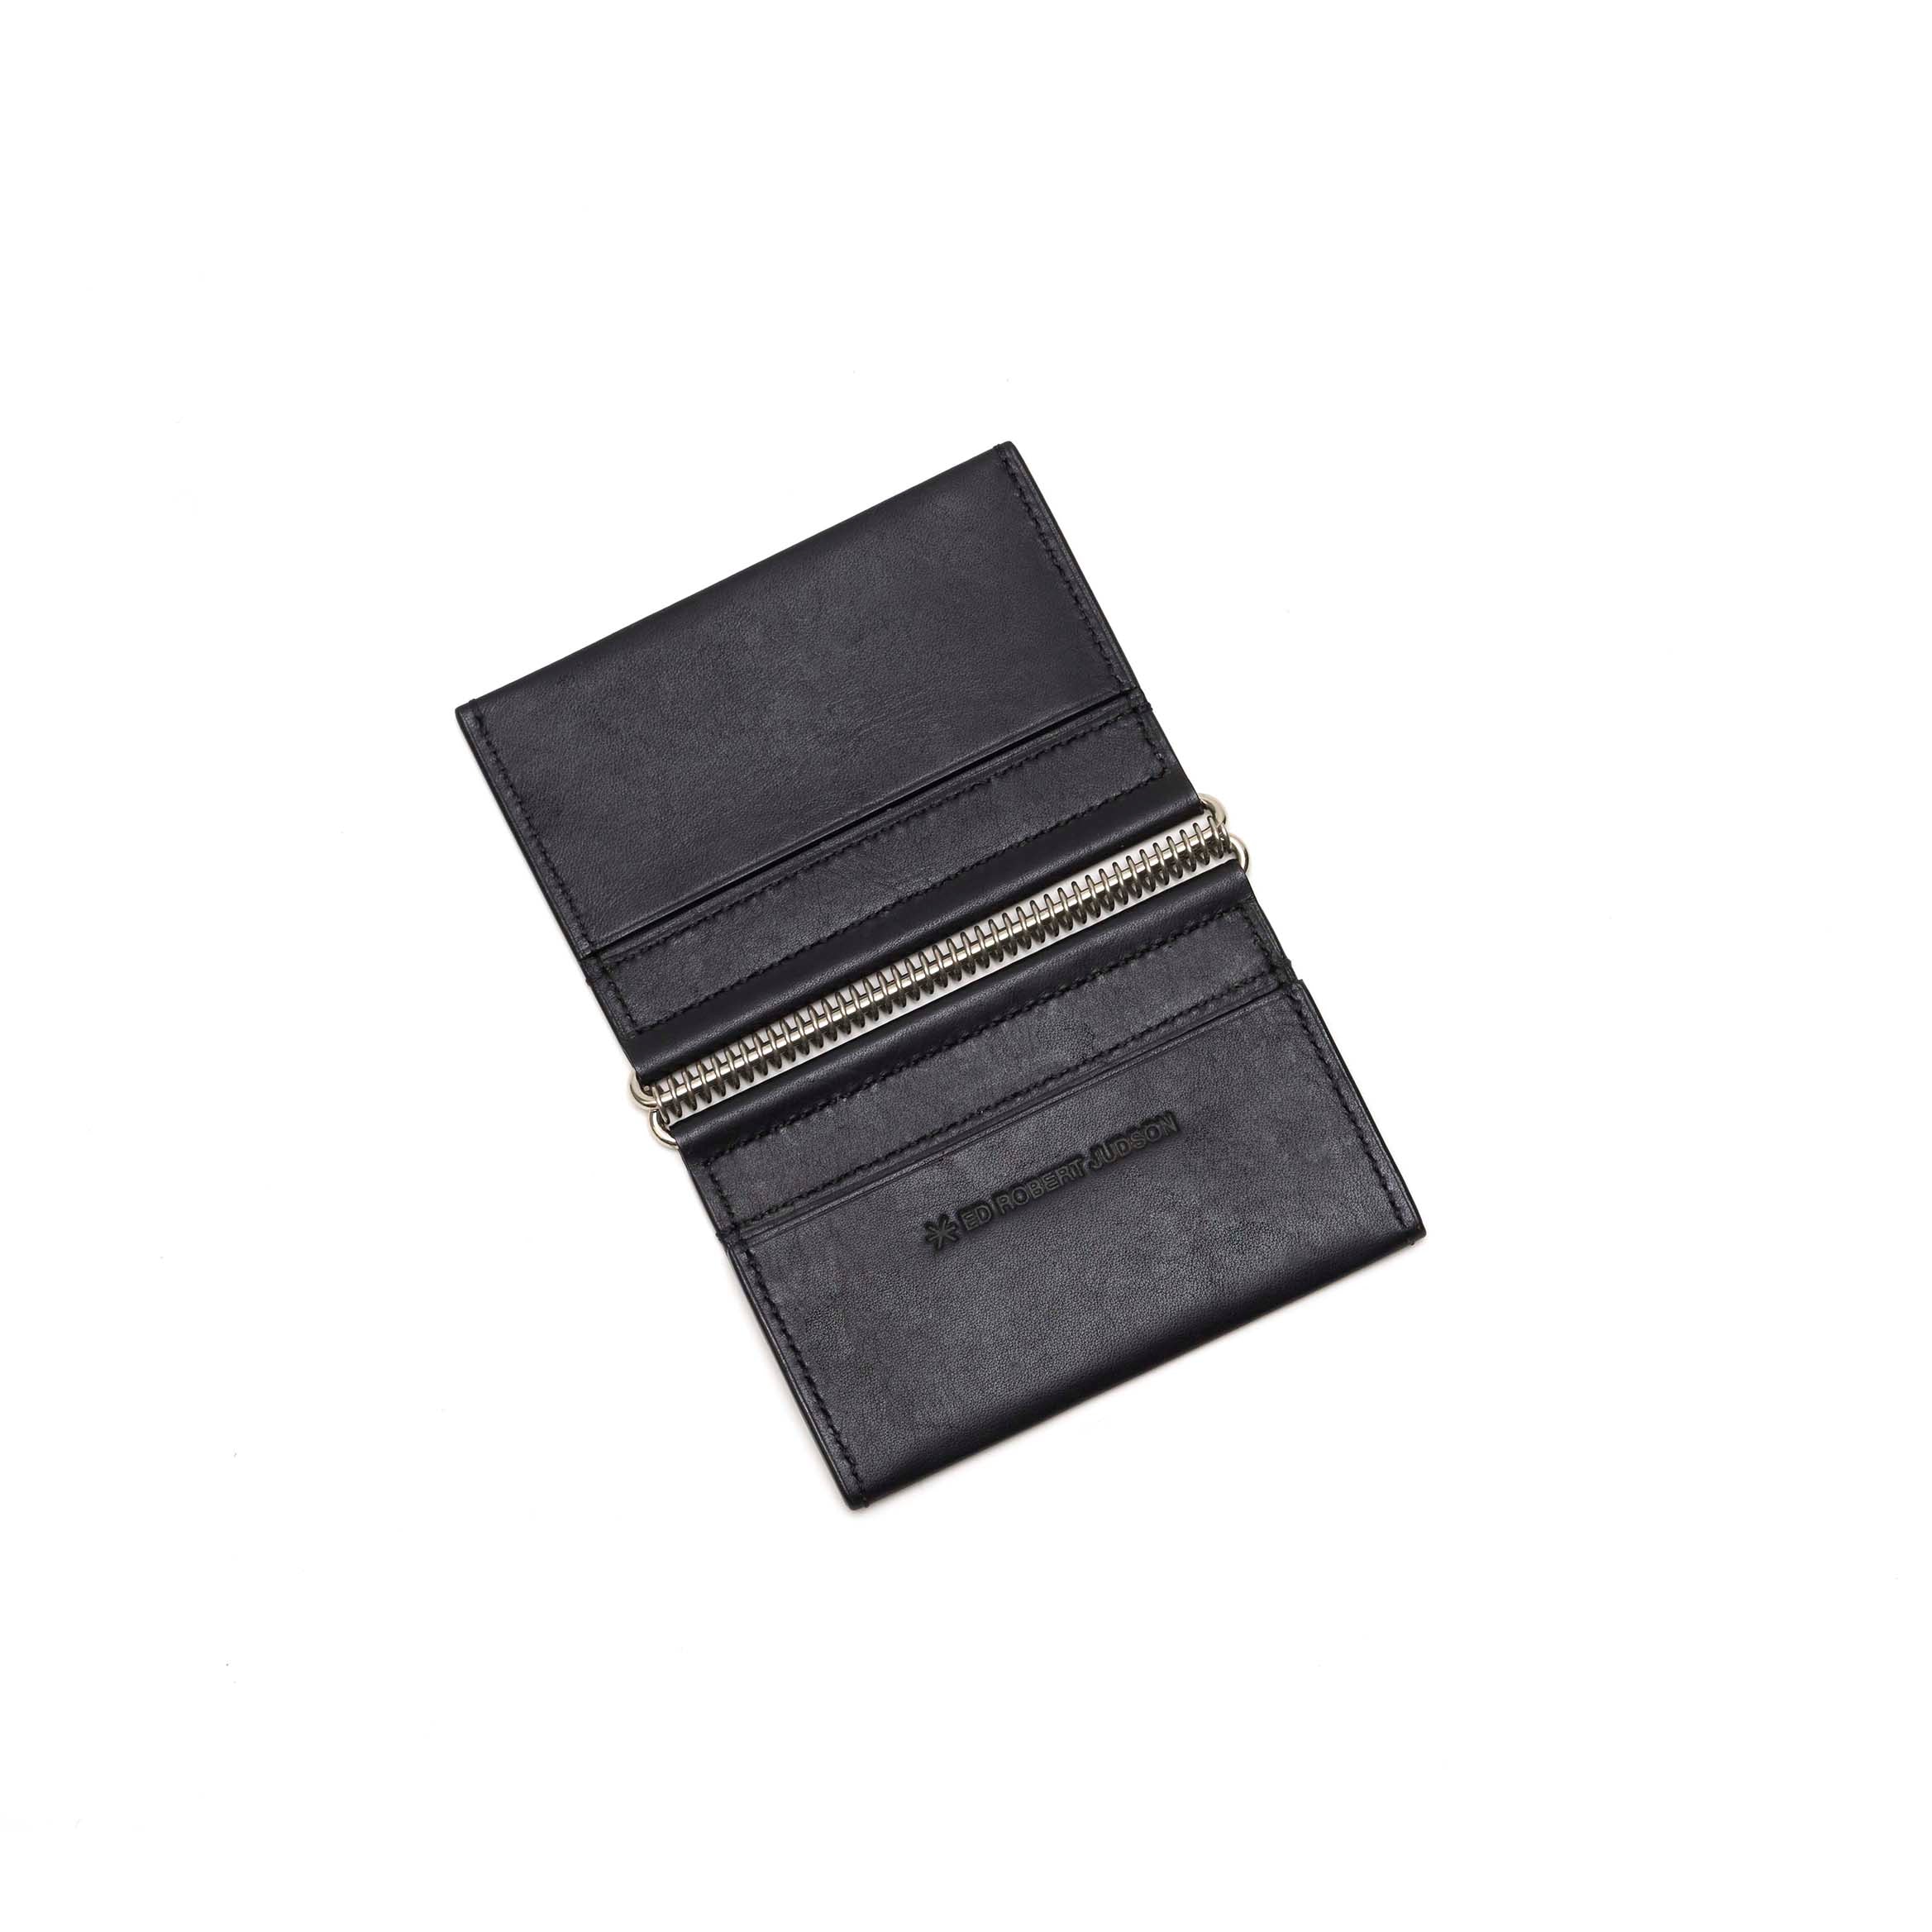 HELIX - COIL SPRING CARD CASE